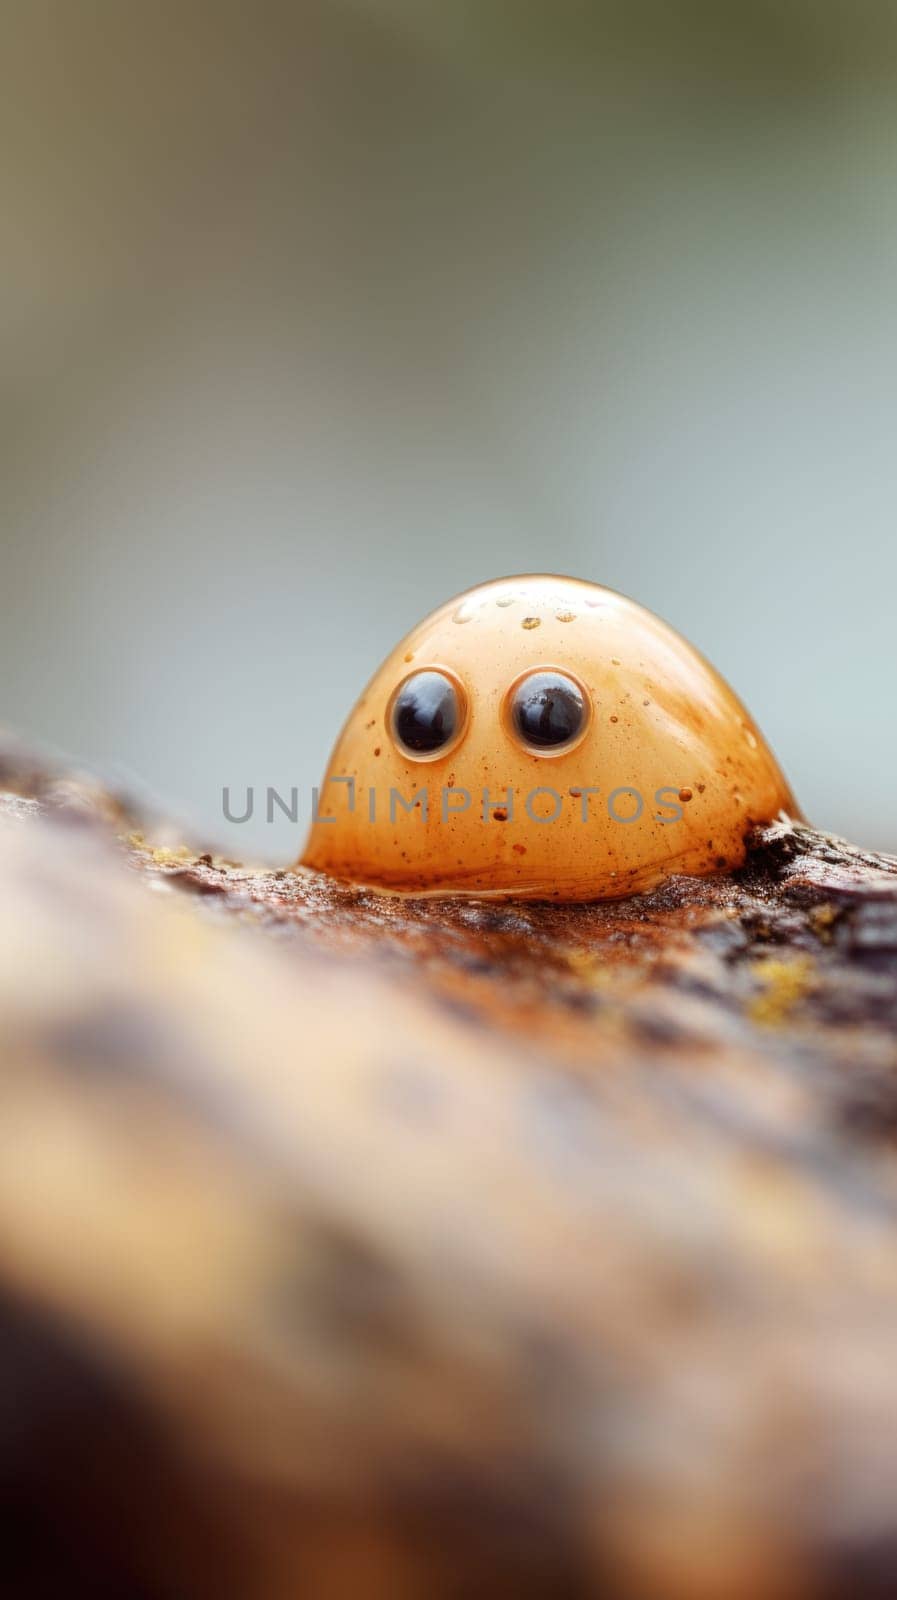 A small orange bug with two eyes on it, AI. Pareidolia. by starush